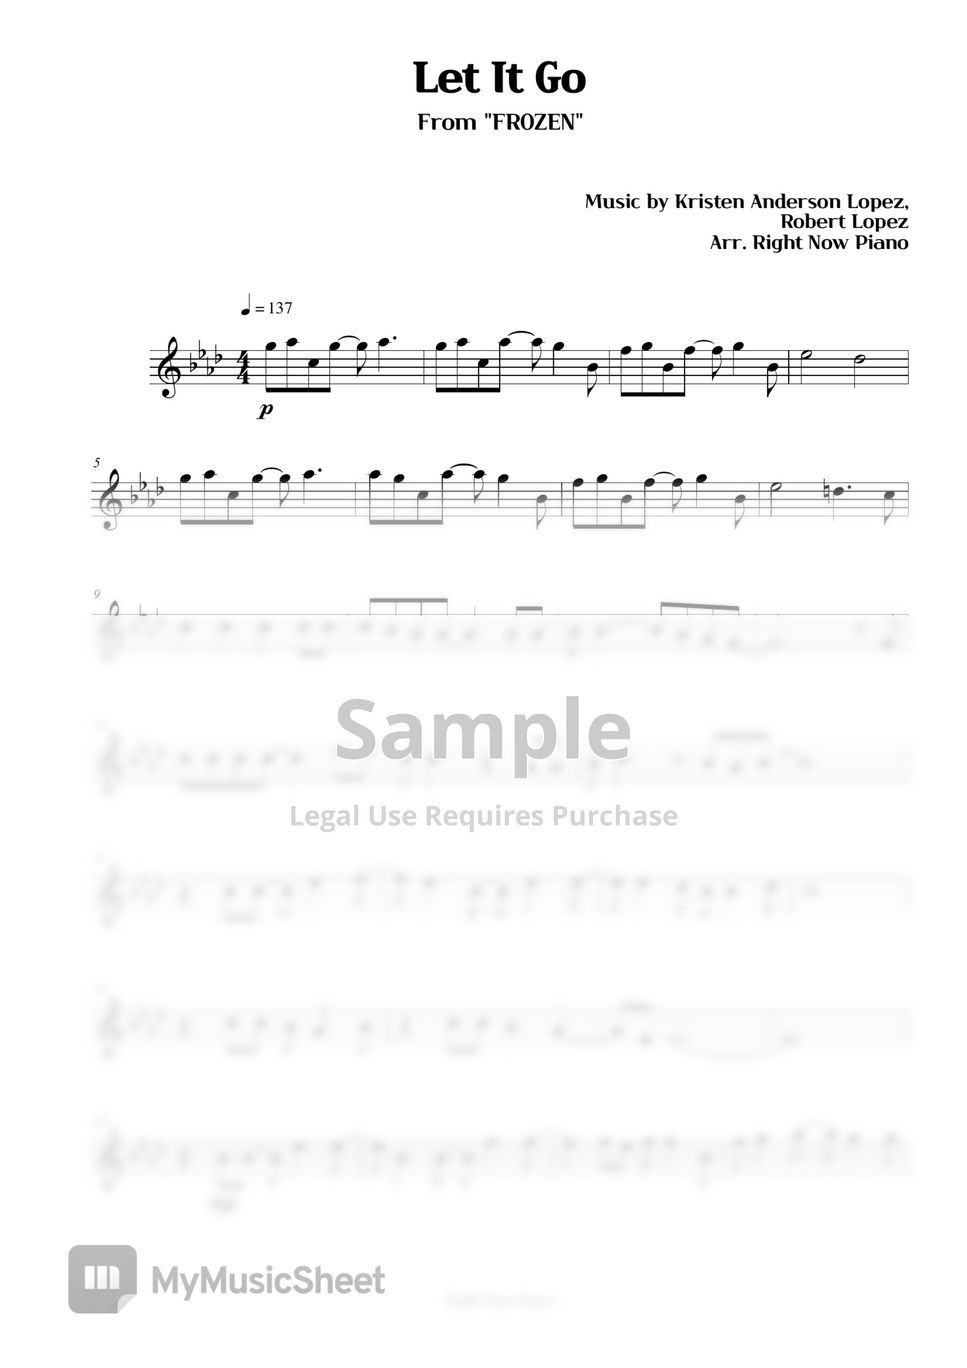 FROZEN - Let It Go (Melody) Sheets by Right Now Piano